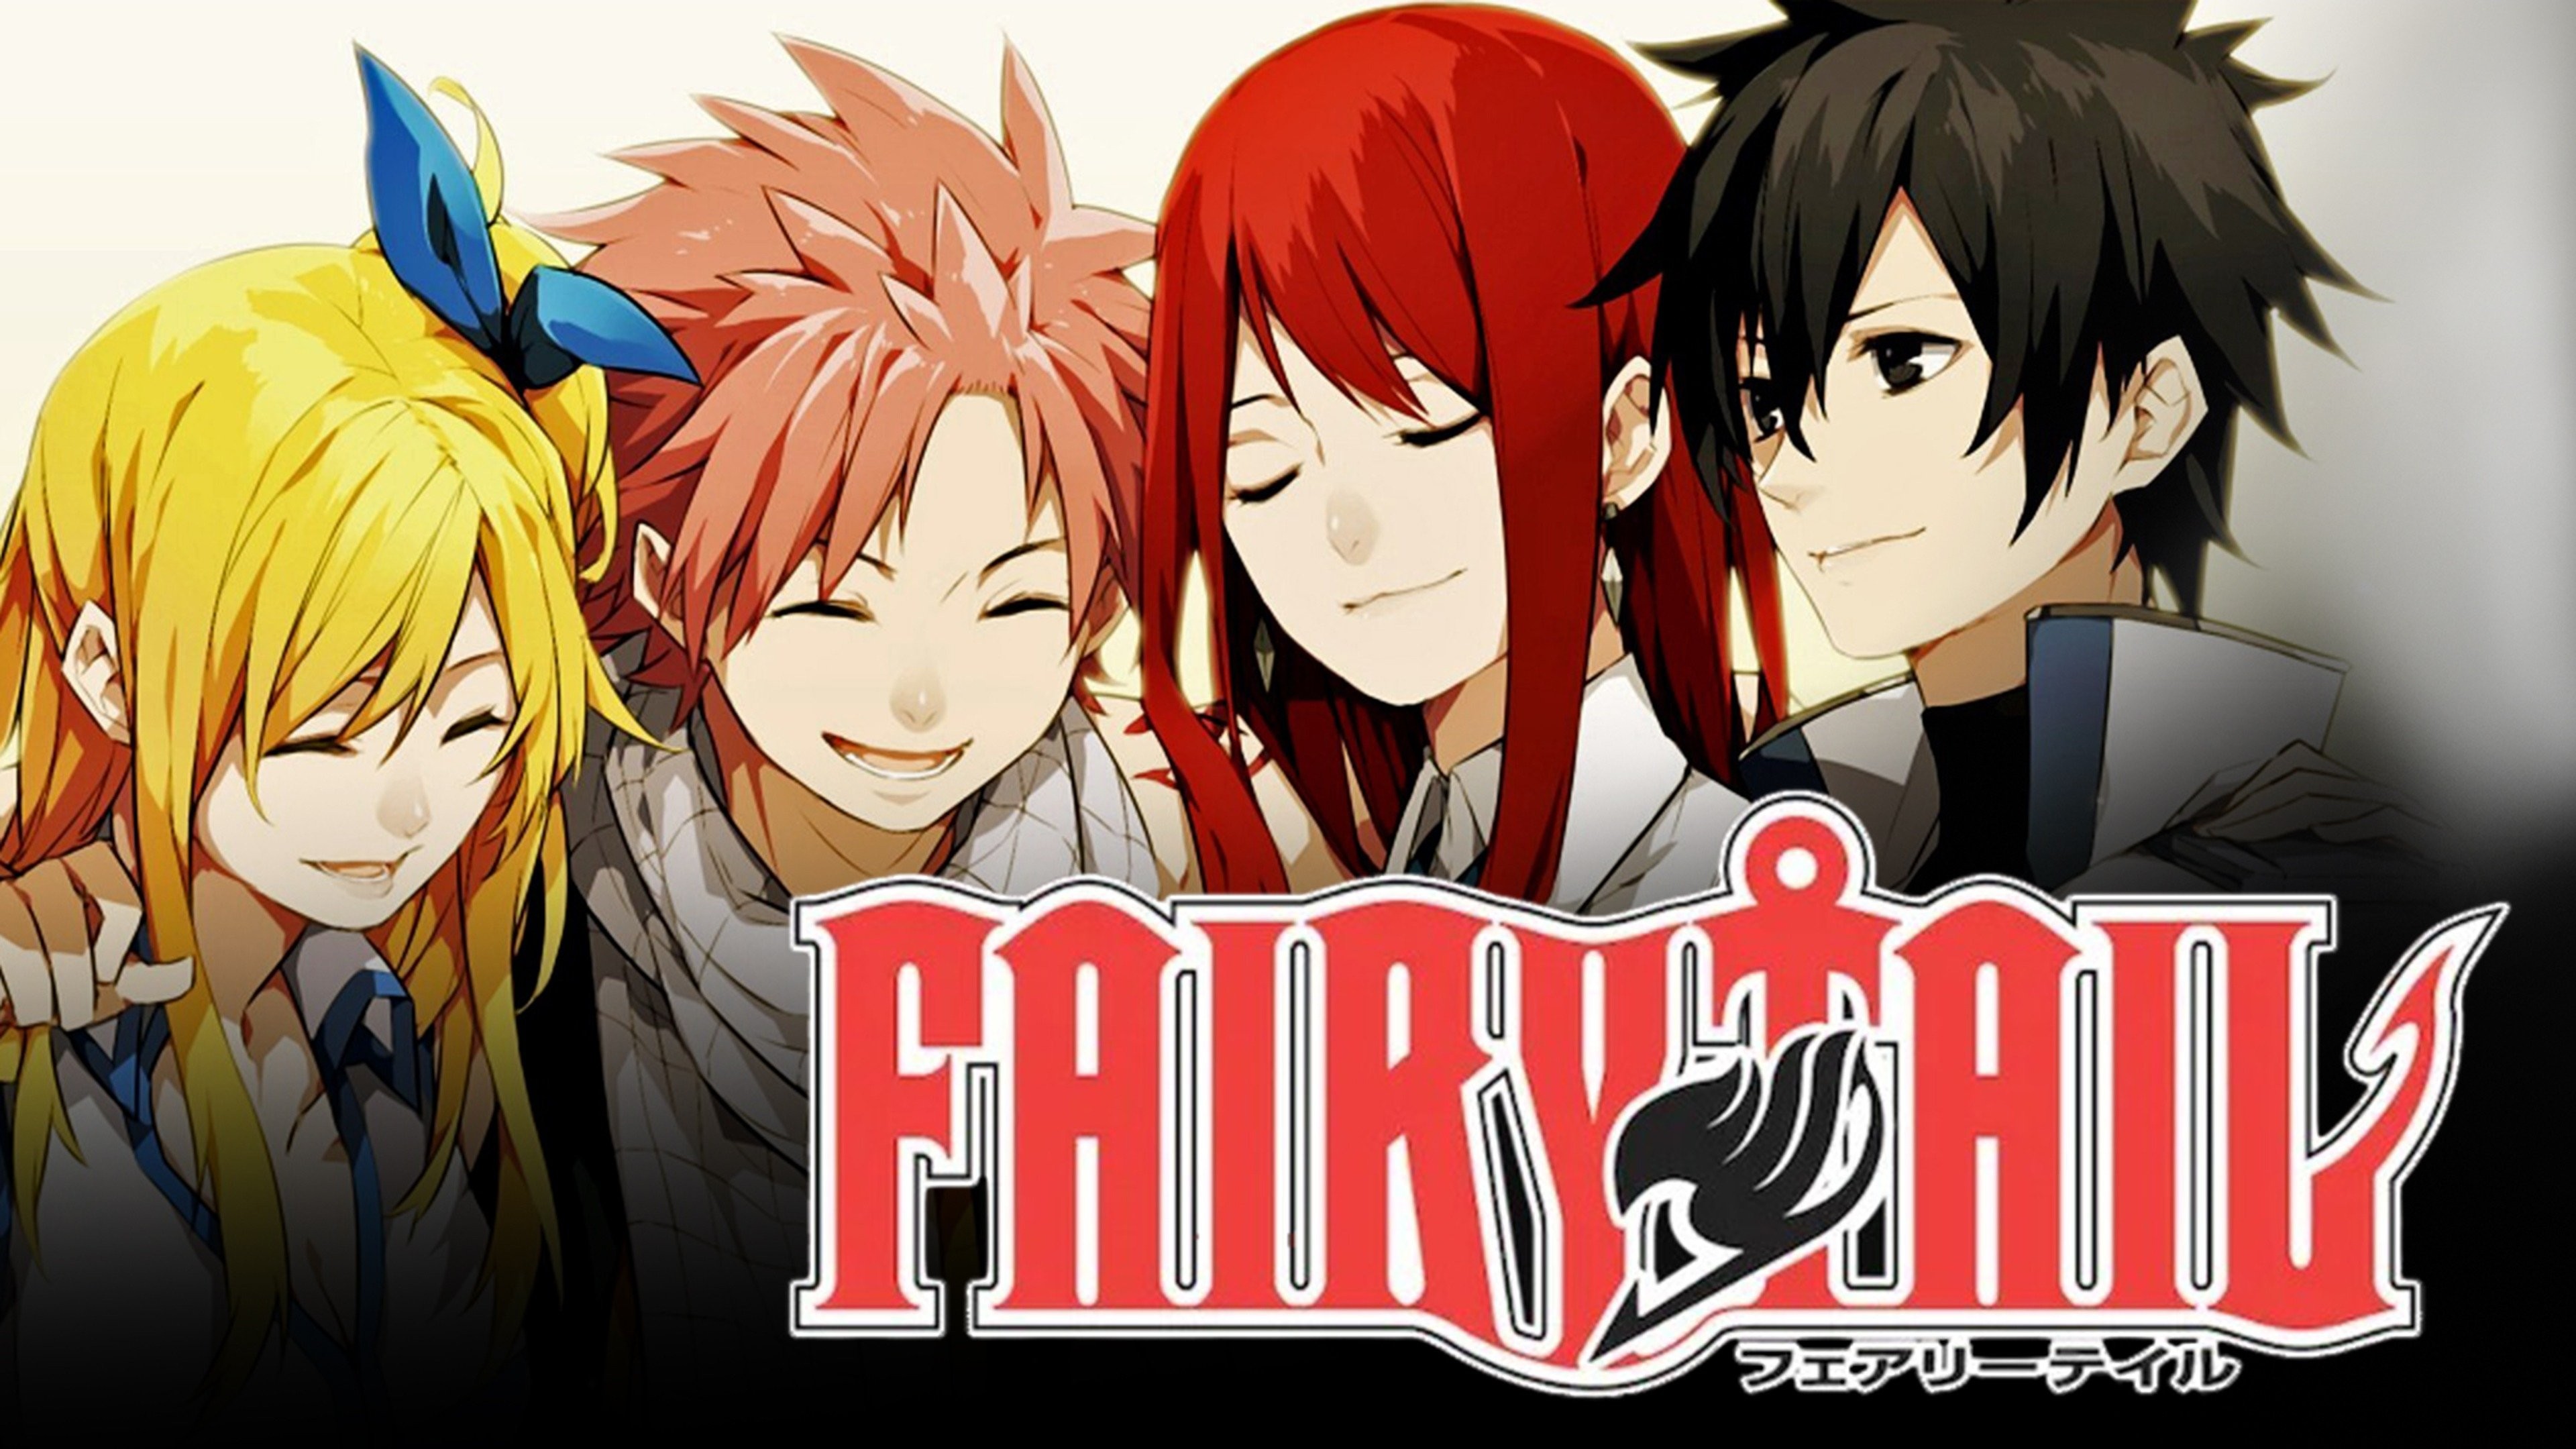 Fairy Tail 19 Review • Anime UK News